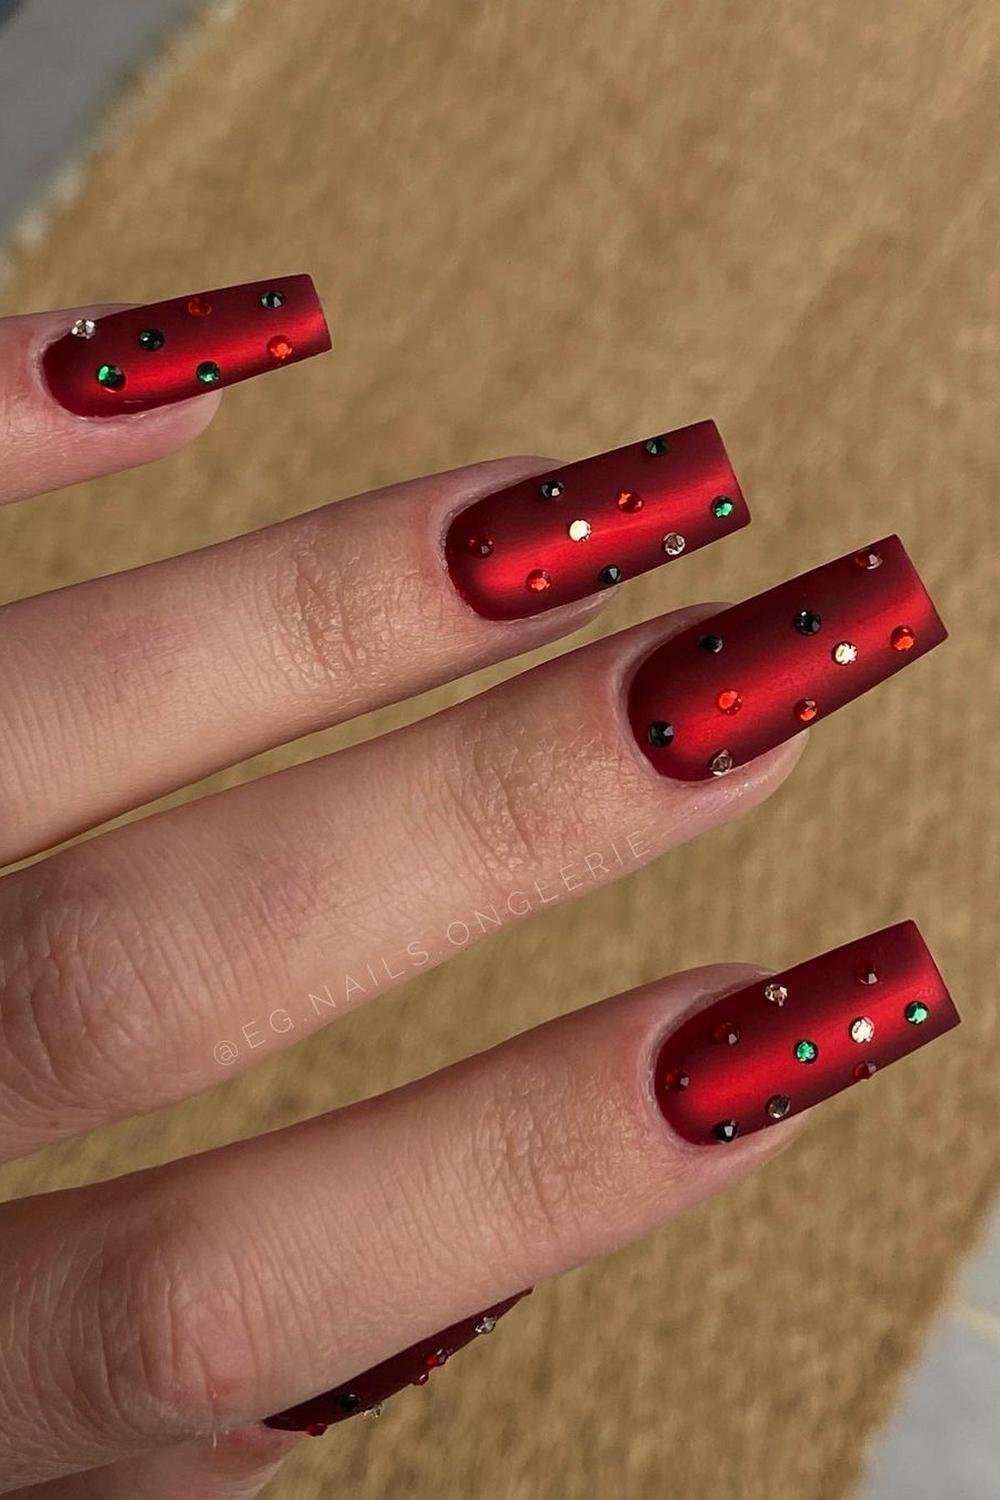 22 - Picture of Red Chrome Nails